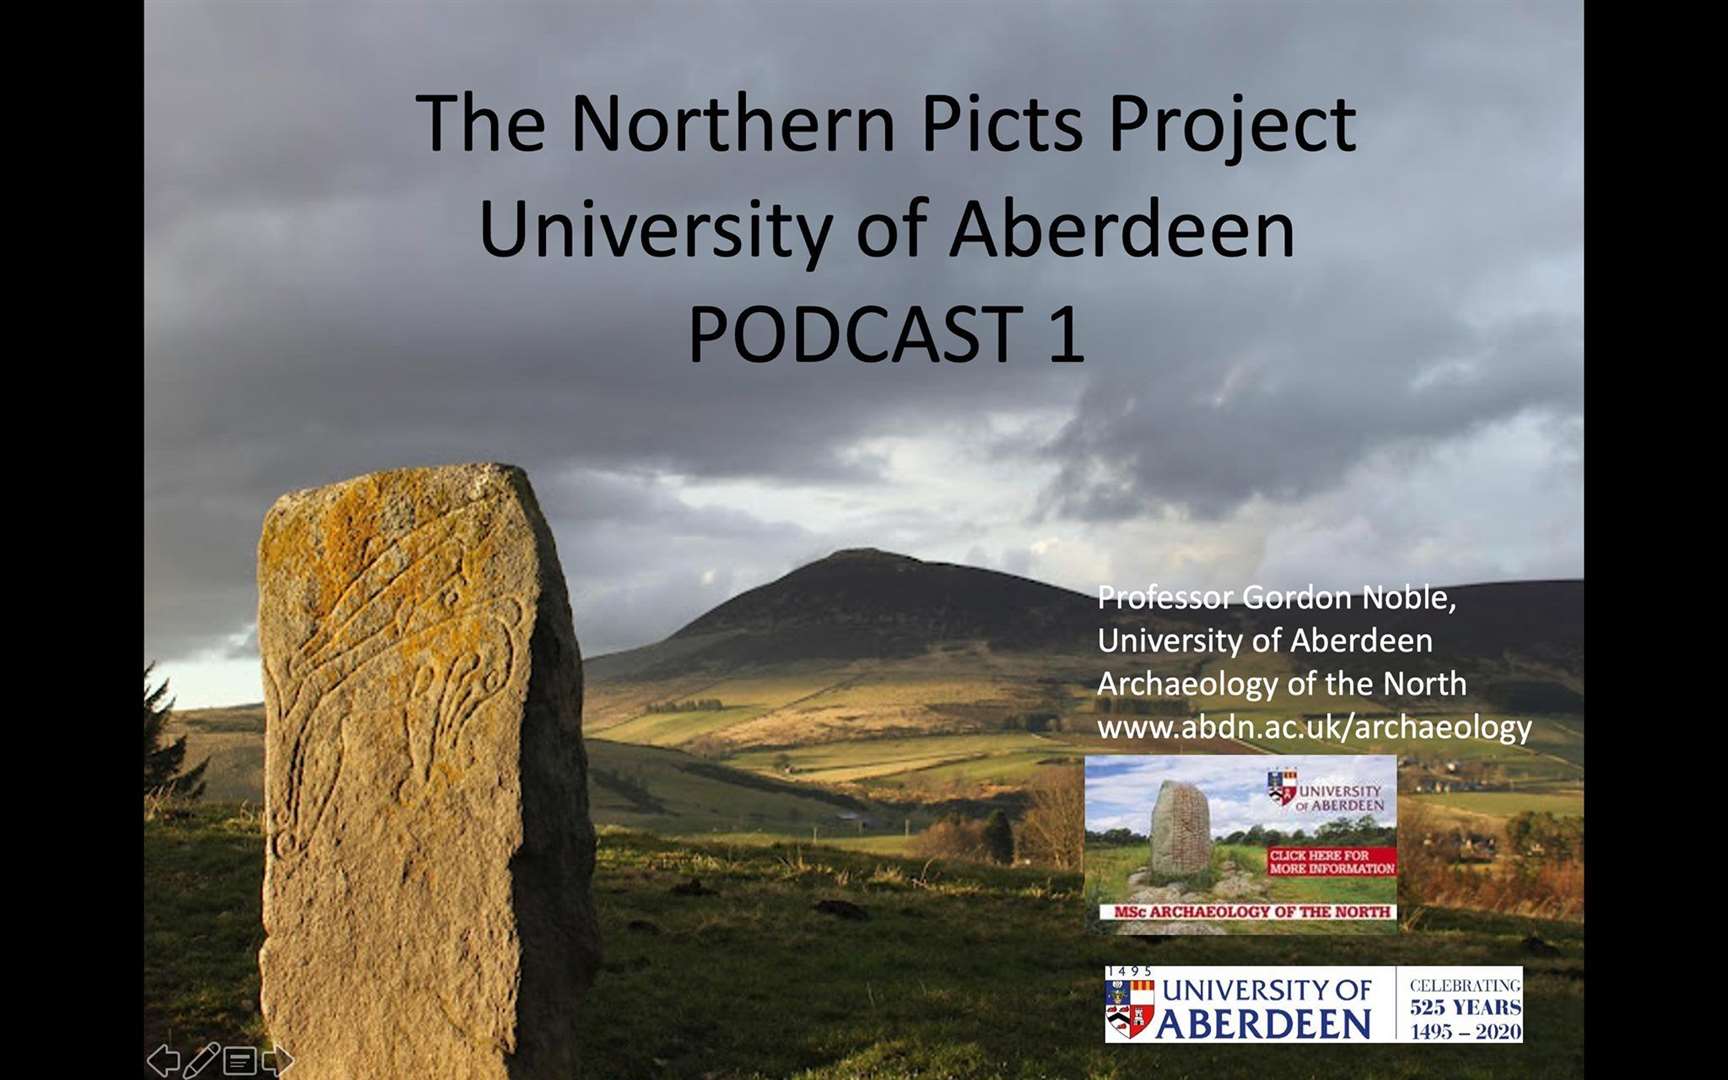 Dr Gordon Noble has created a podcast and slideshow of his introduction to the Picts.